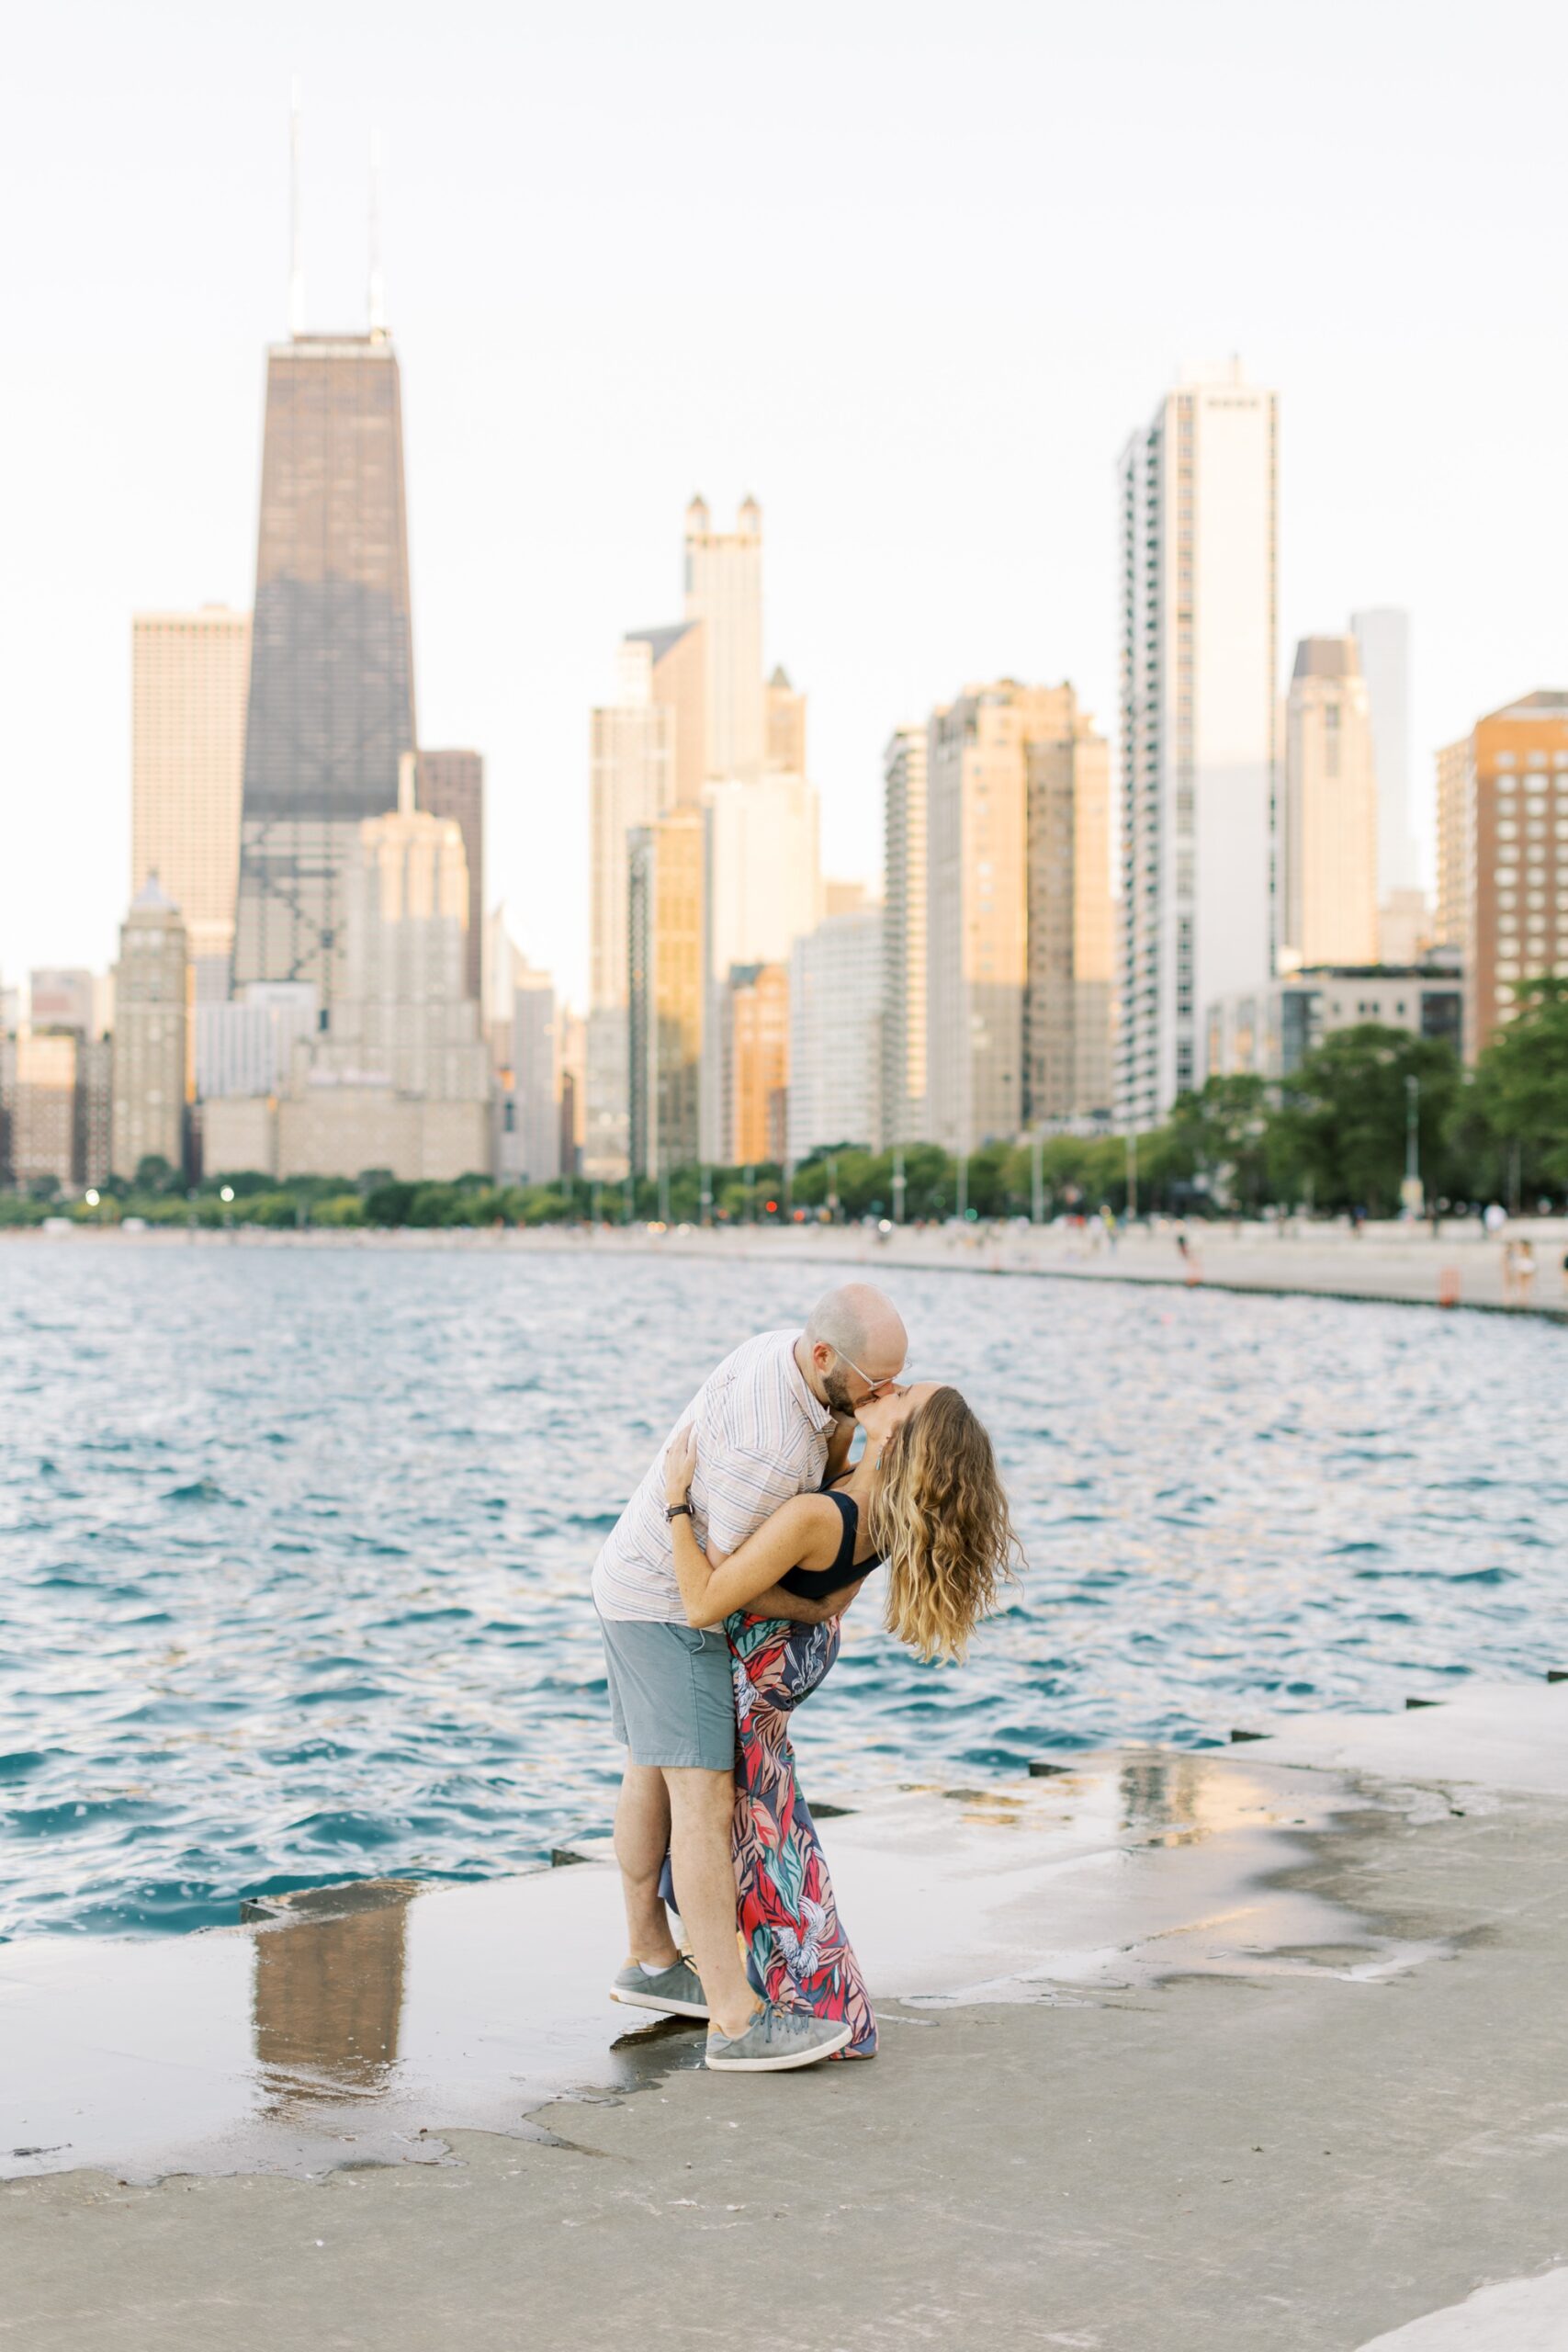 The couple kissed with the Chicago skyline background